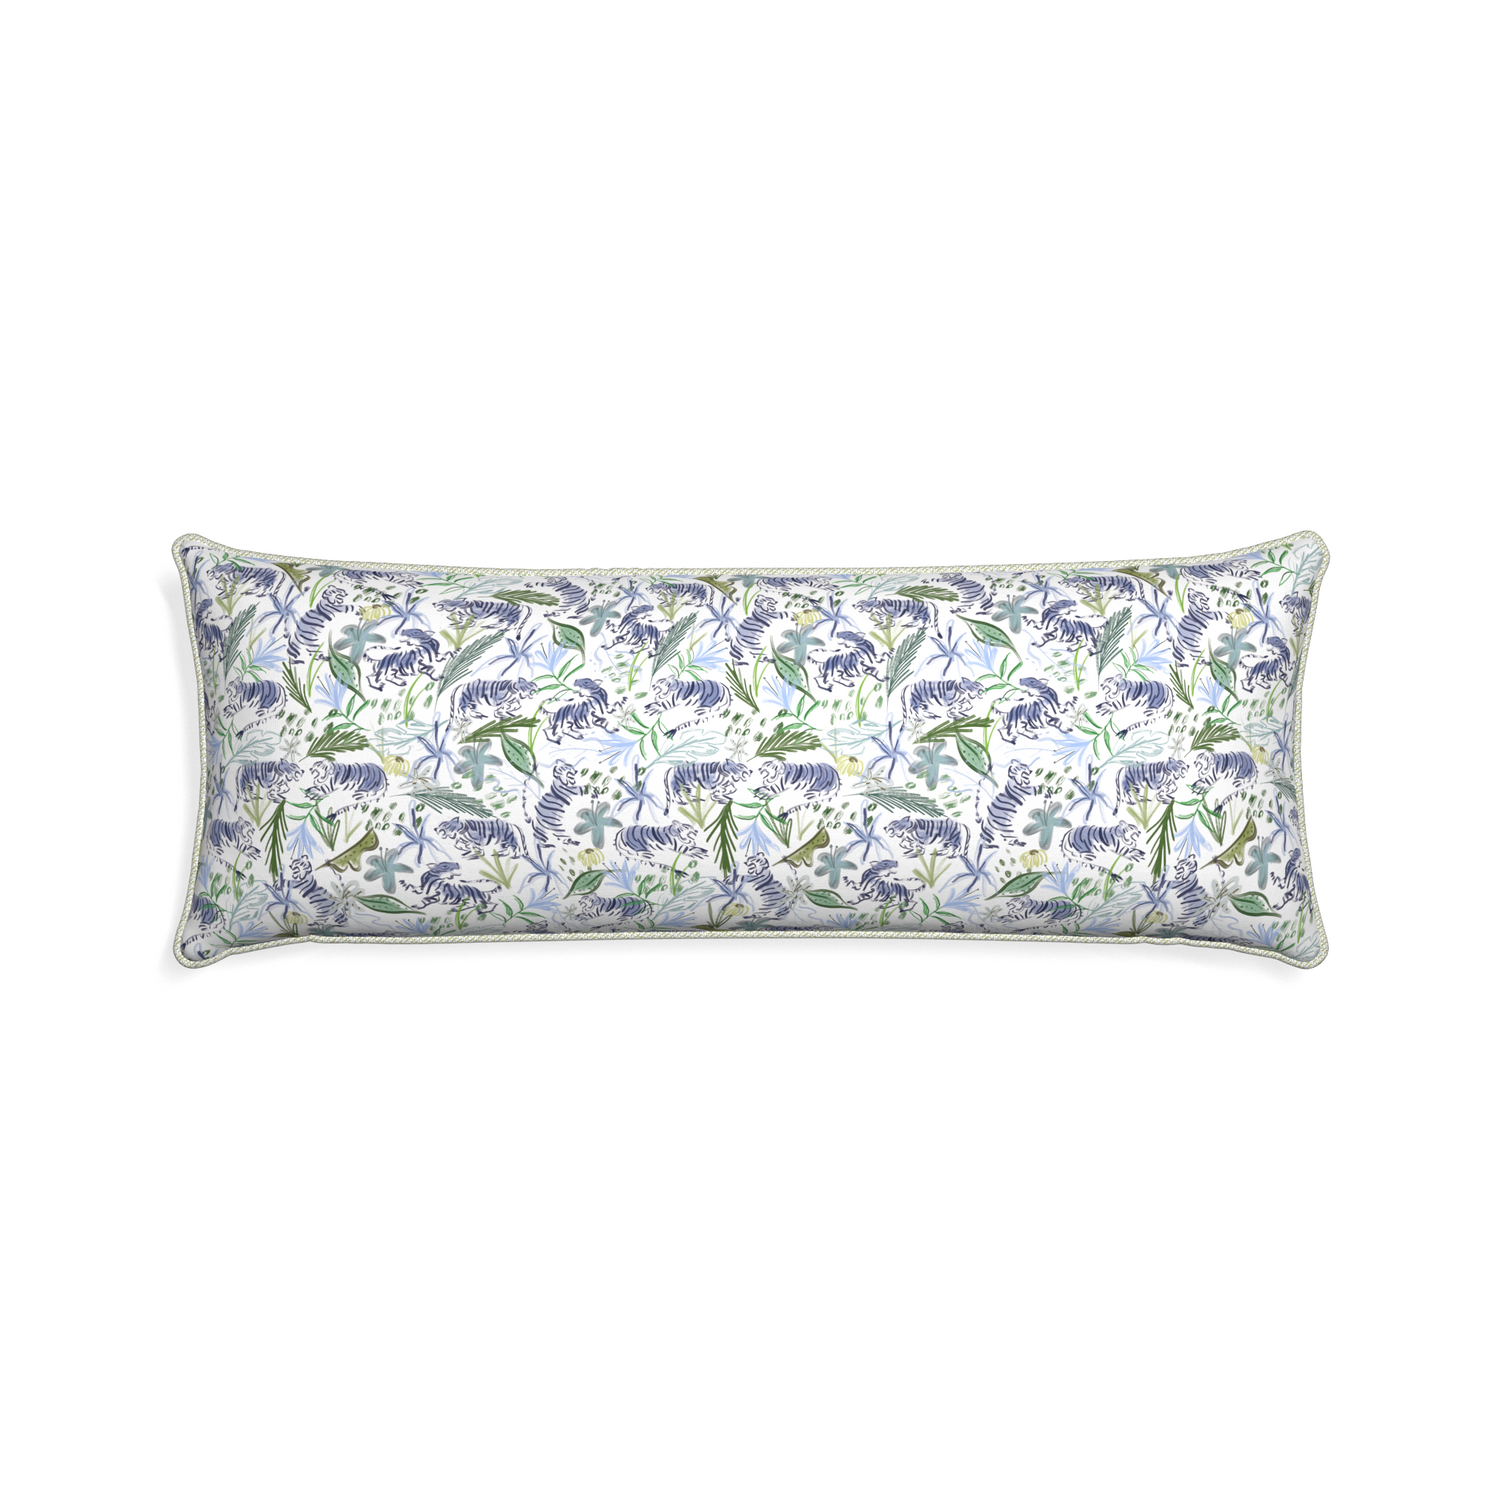 Xl-lumbar frida green custom green tigerpillow with l piping on white background